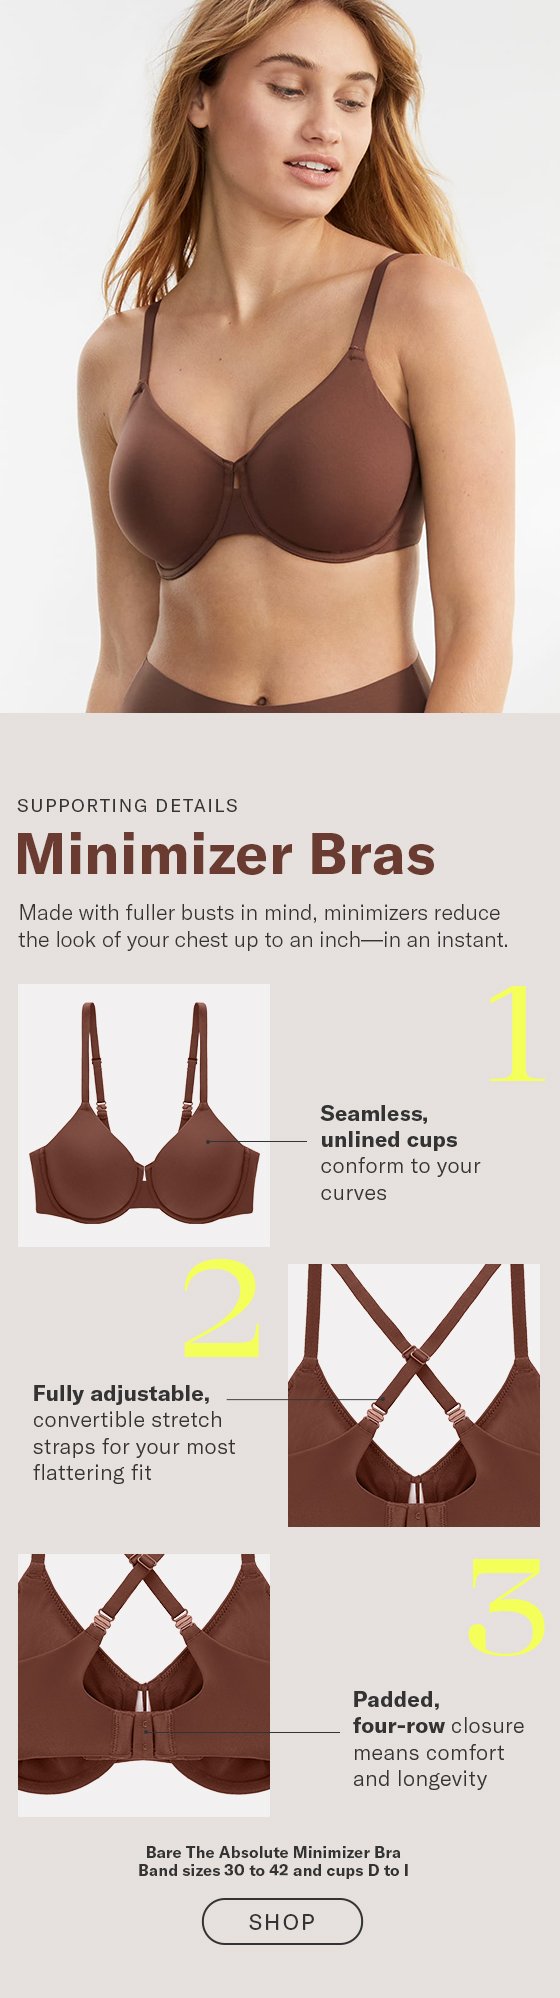 Discover The Benefits Of Minimizer Bras - Bare Necessities